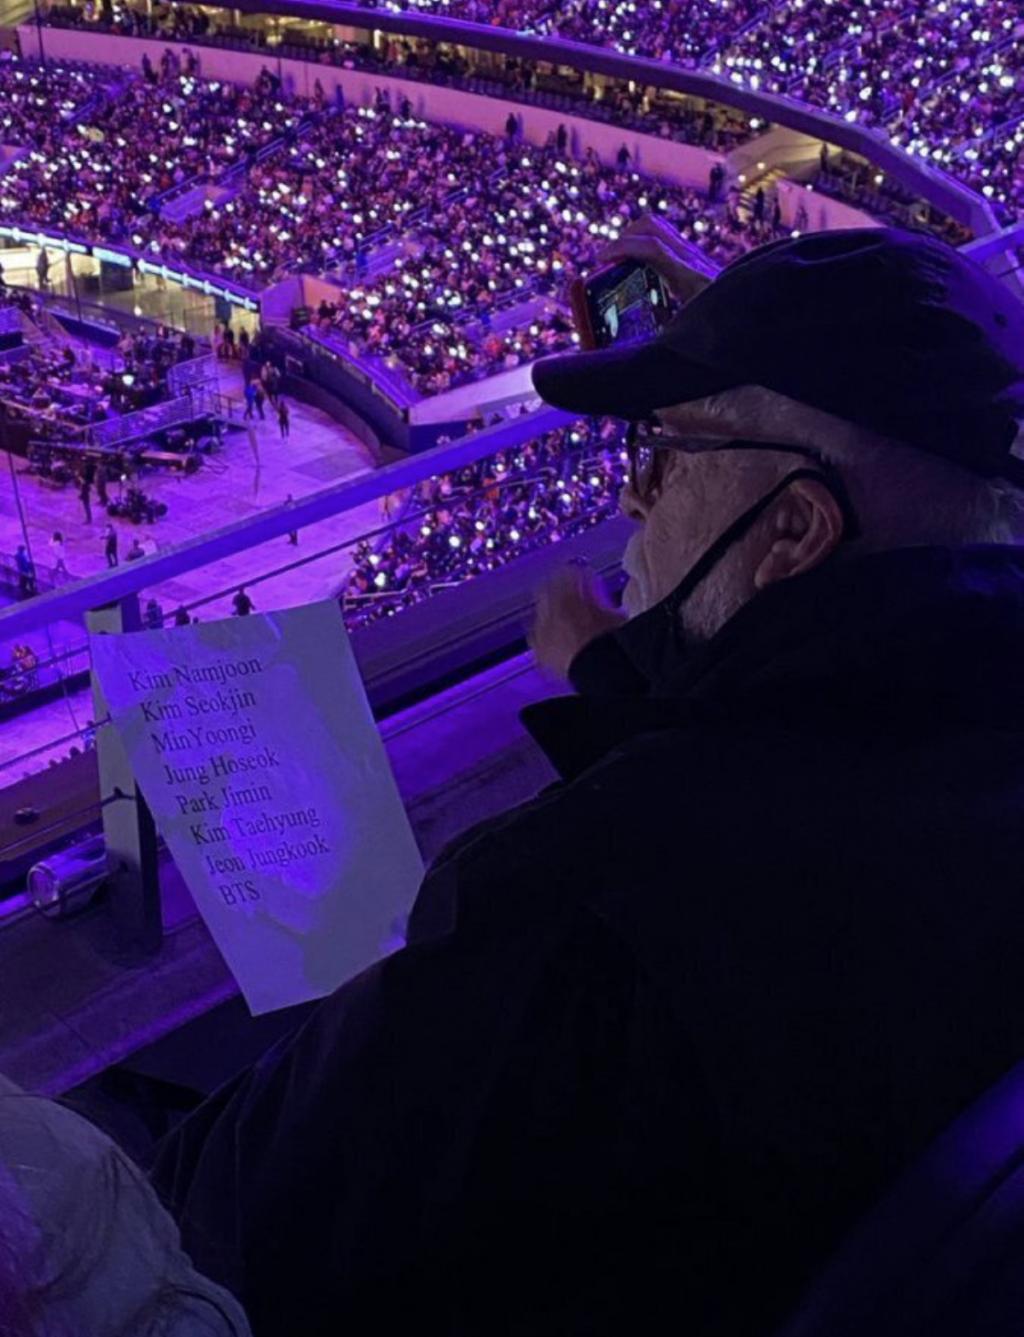 Grandfathers who printed cheering slogans at the BTS concert.